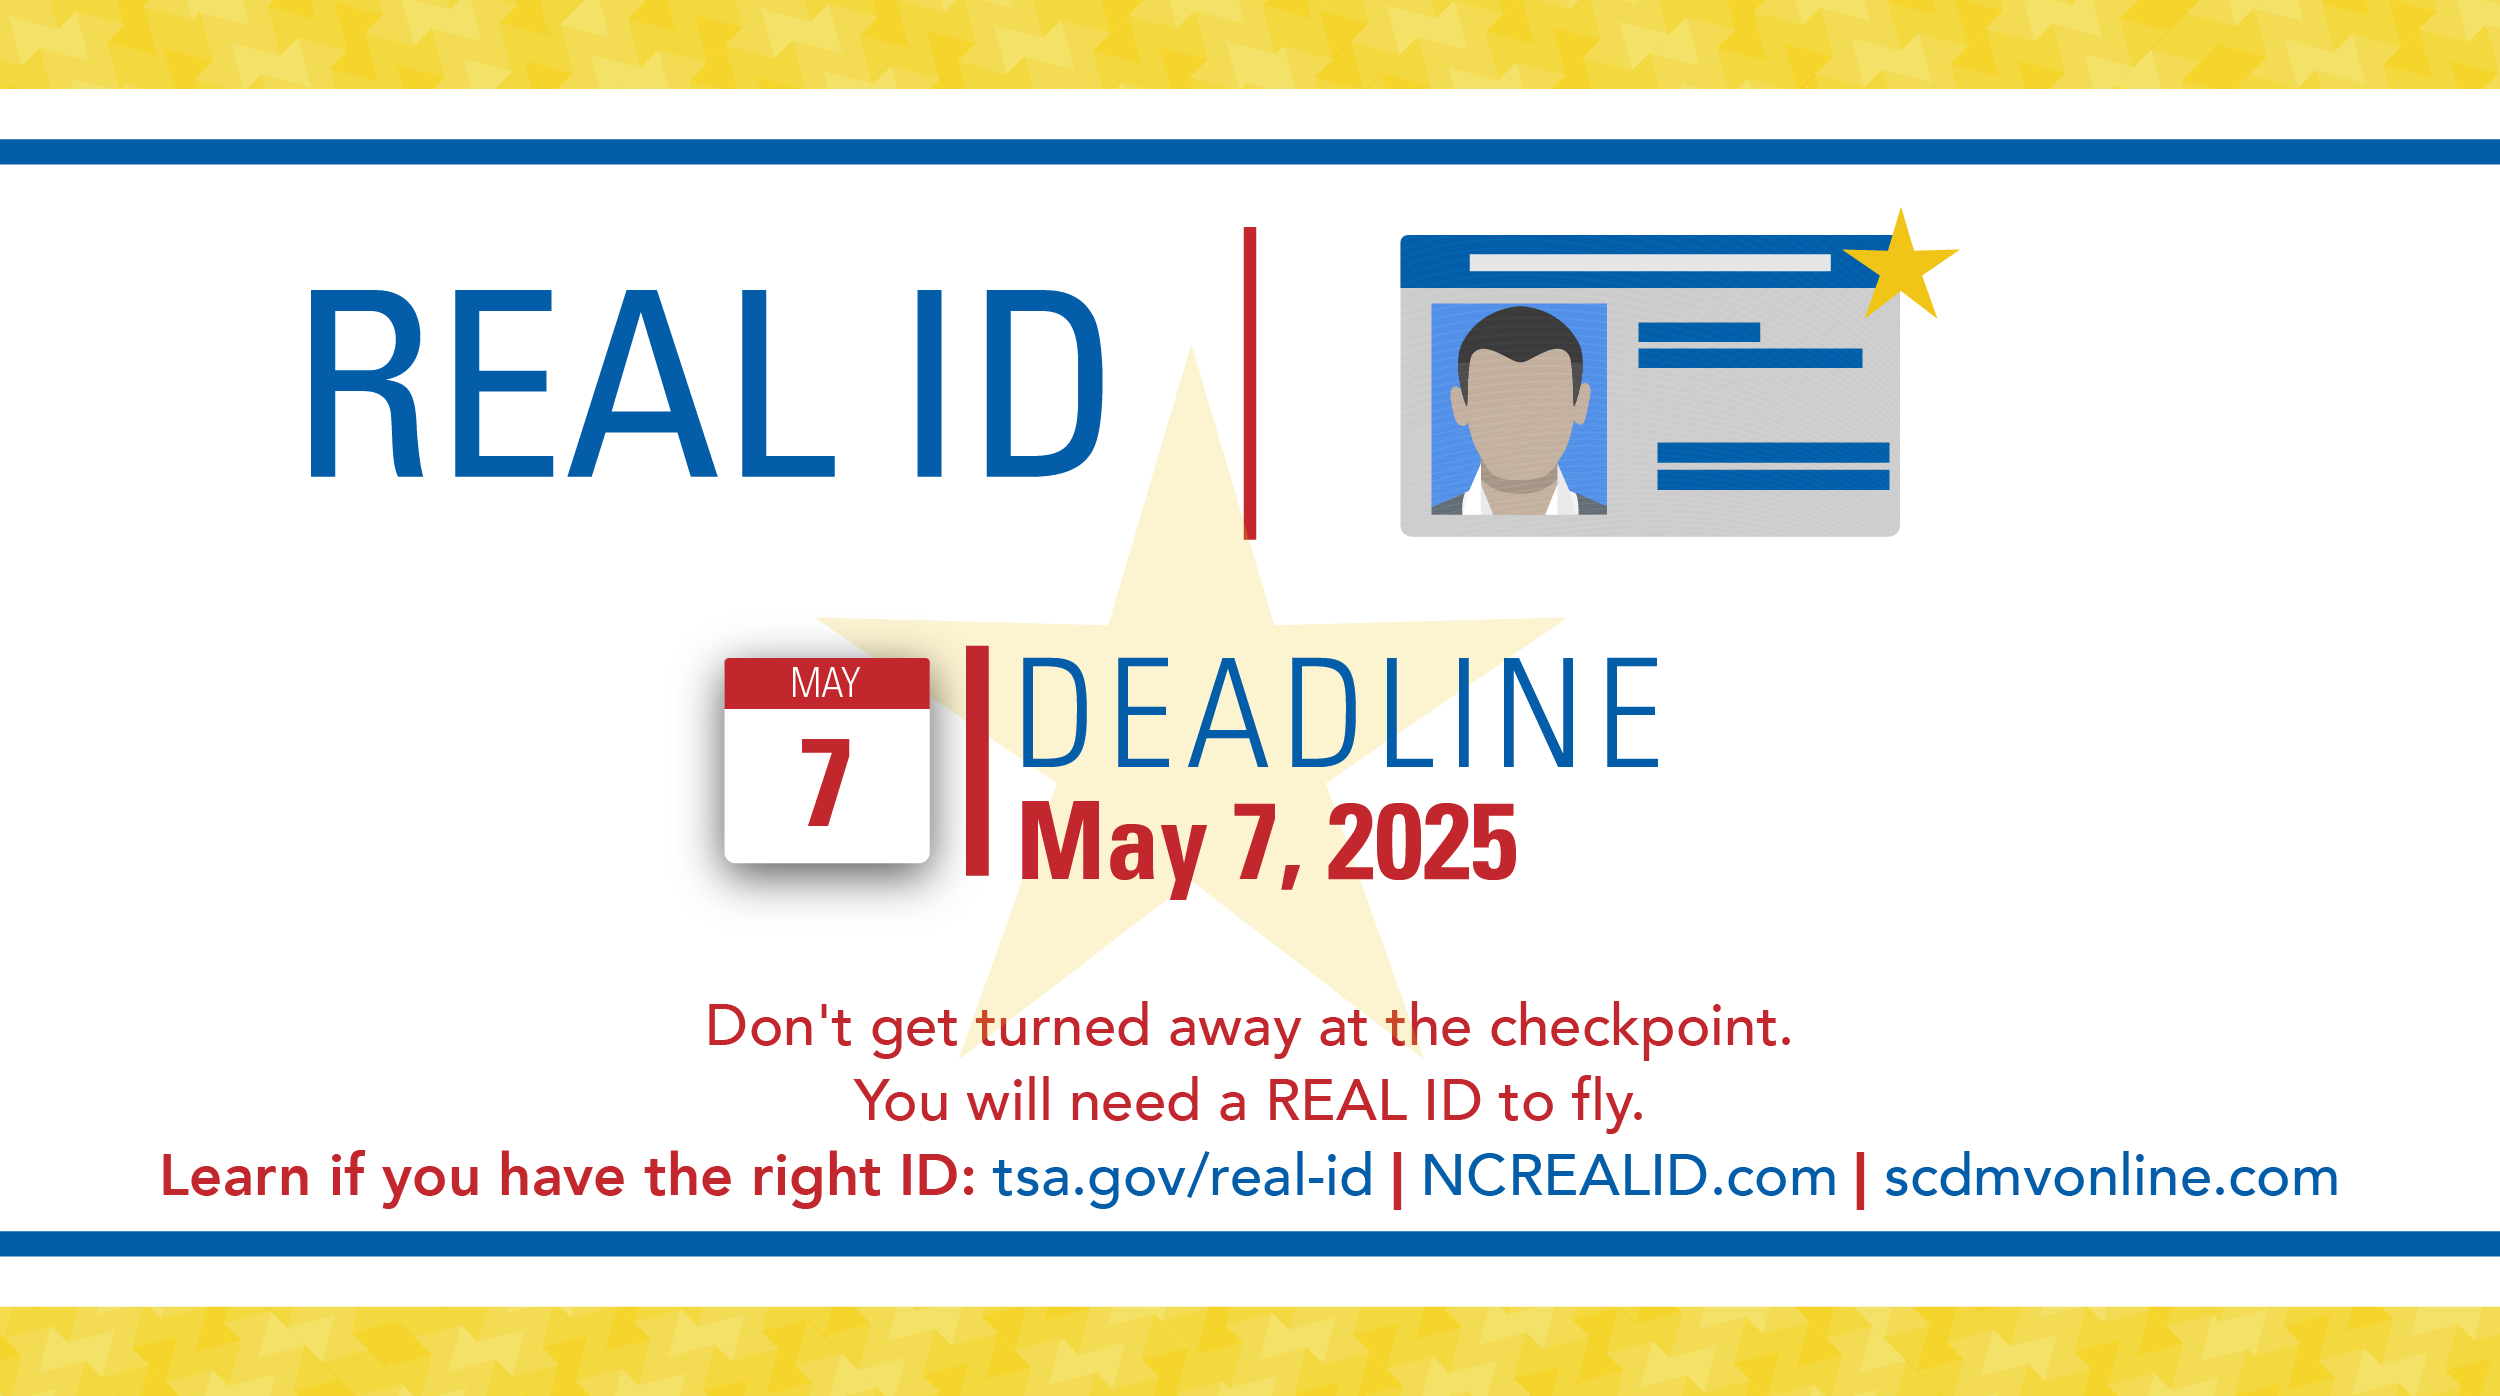 REAL ID graphic with May 7, 2025 deadline, clipart image of driver's license with Real ID symbol